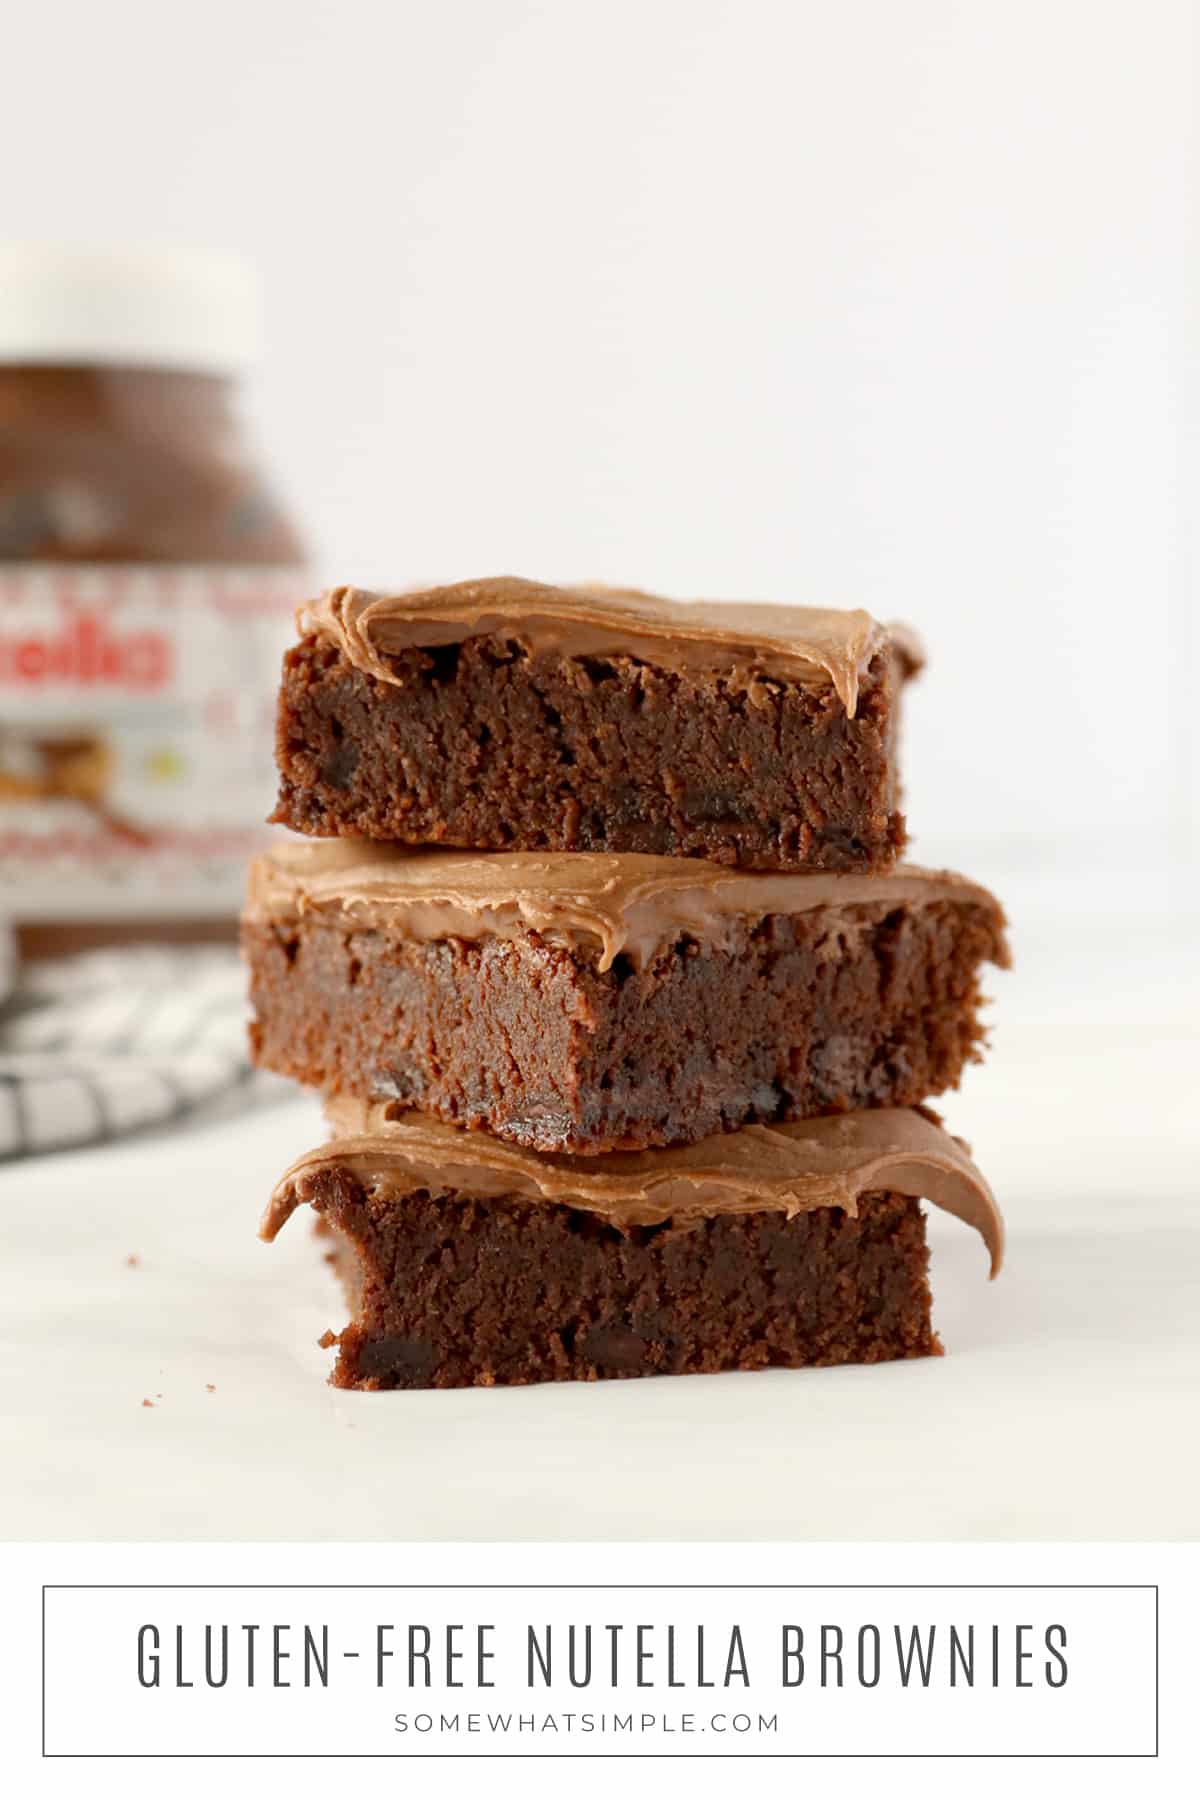 The perfect gluten-free brownie recipe to satisfy your craving for something chocolatey - these Double Chocolate Nutella Brownies are simple to make and totally delicious! via @somewhatsimple